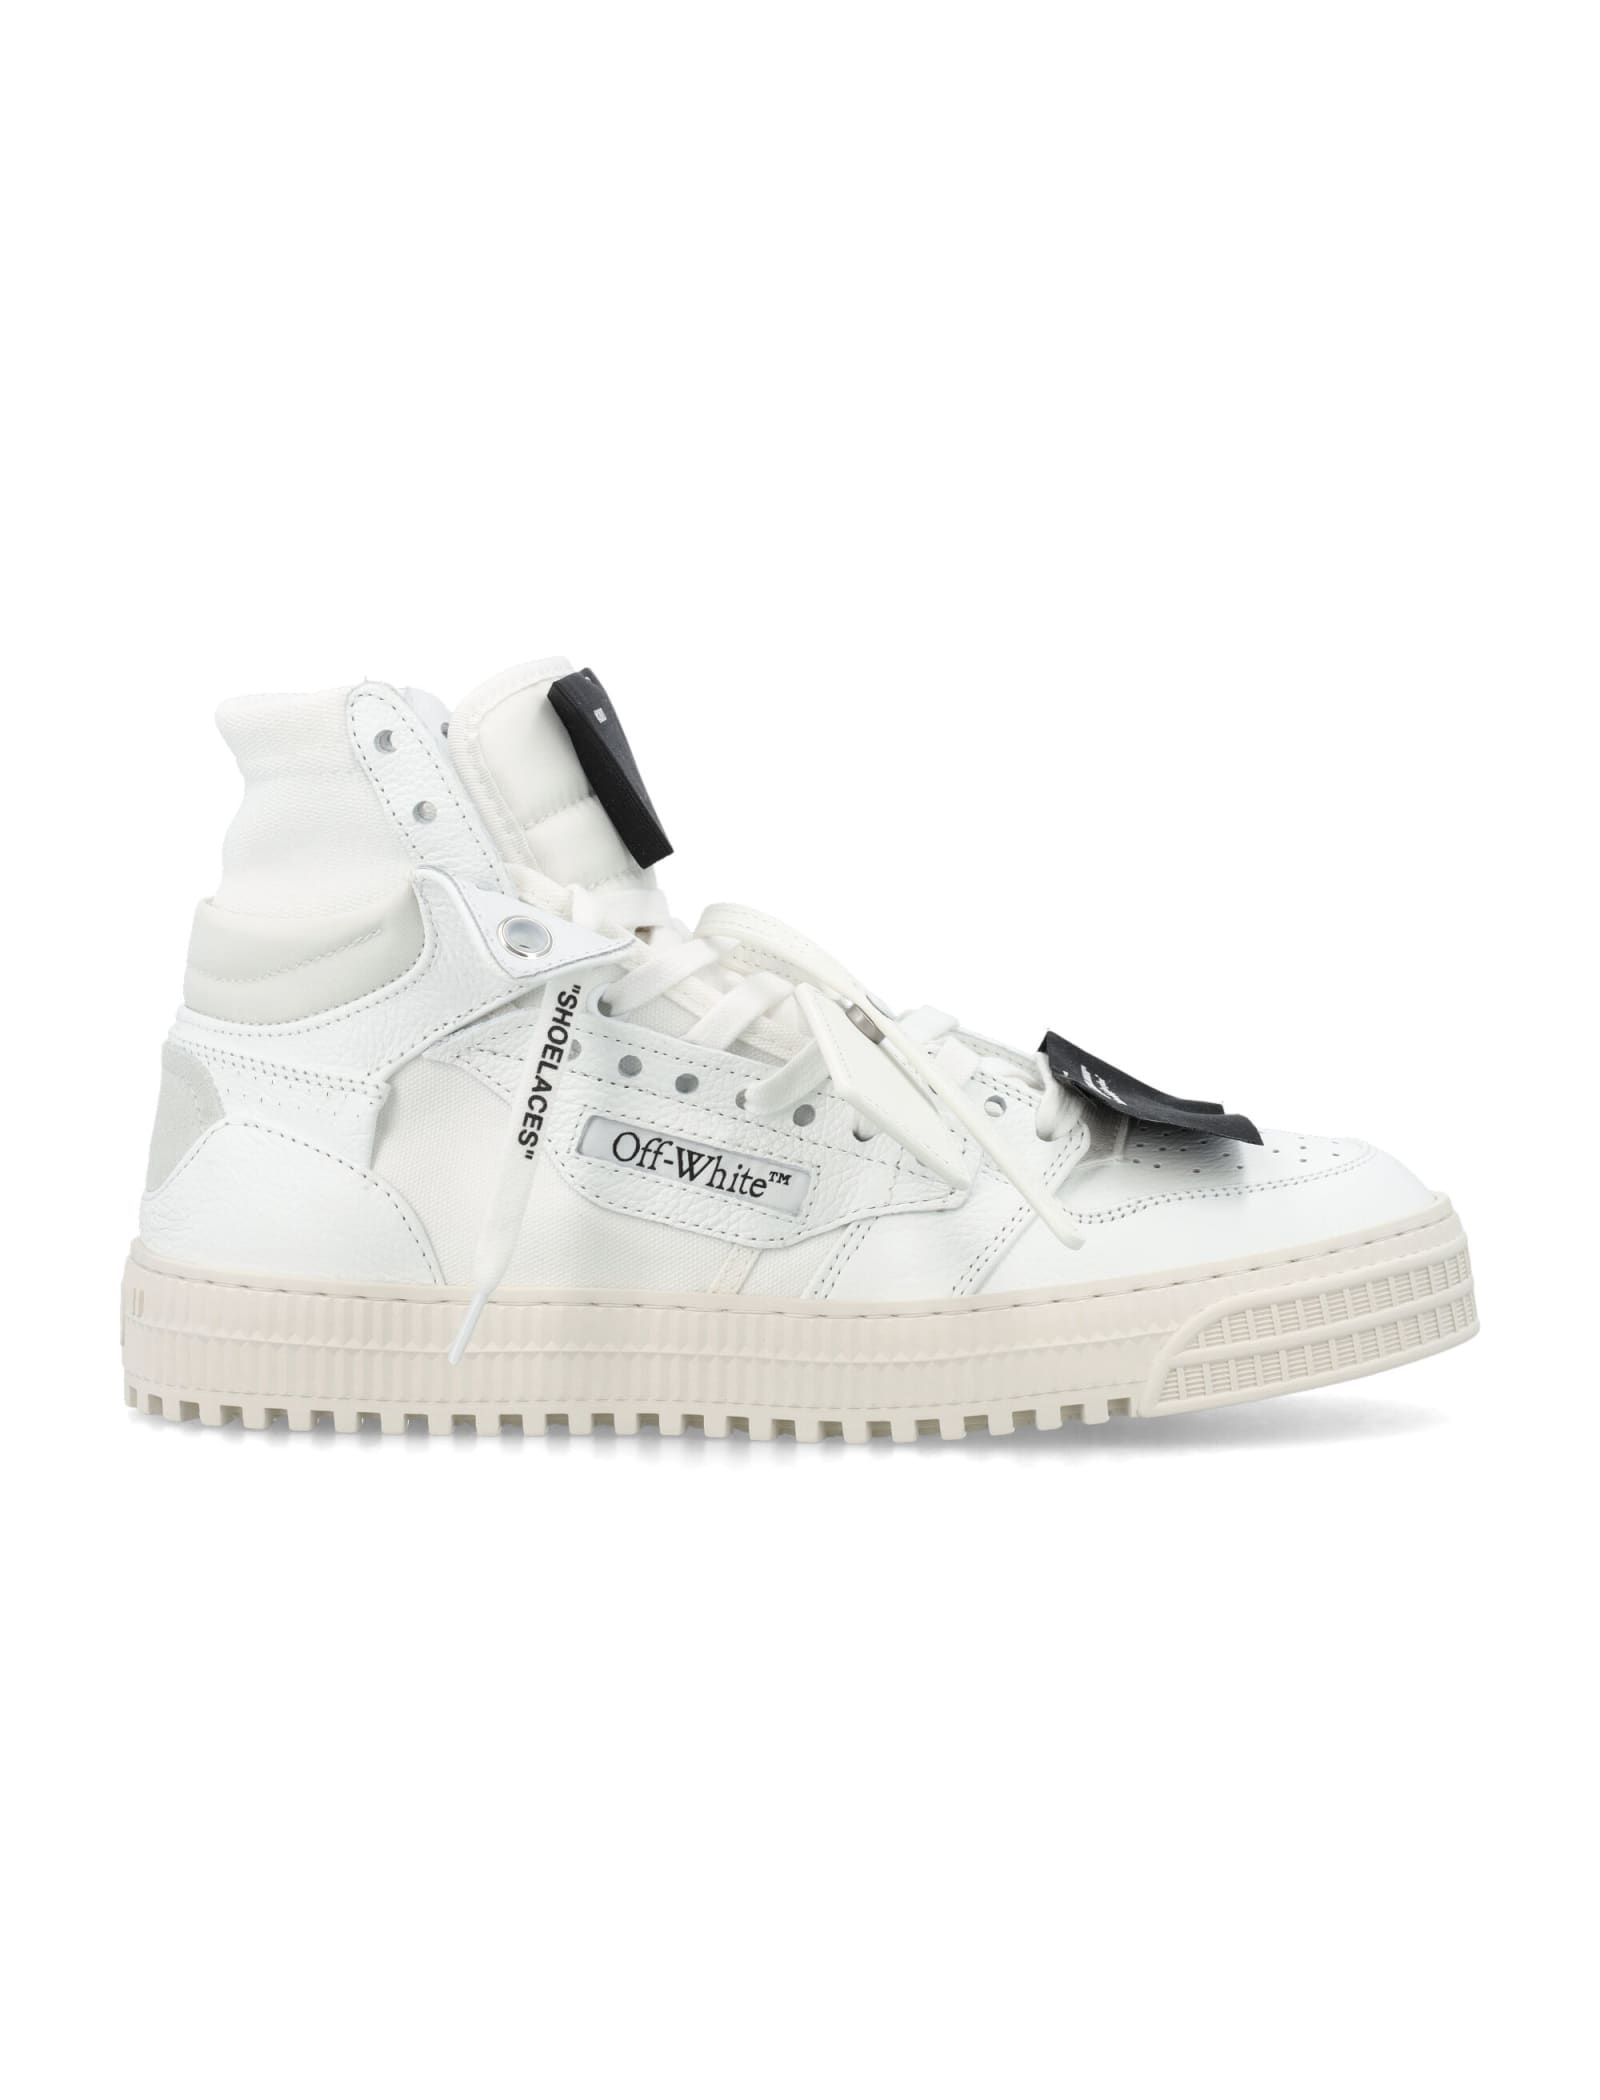 Off-white 3.0 Off Court Leather High-top In White Black